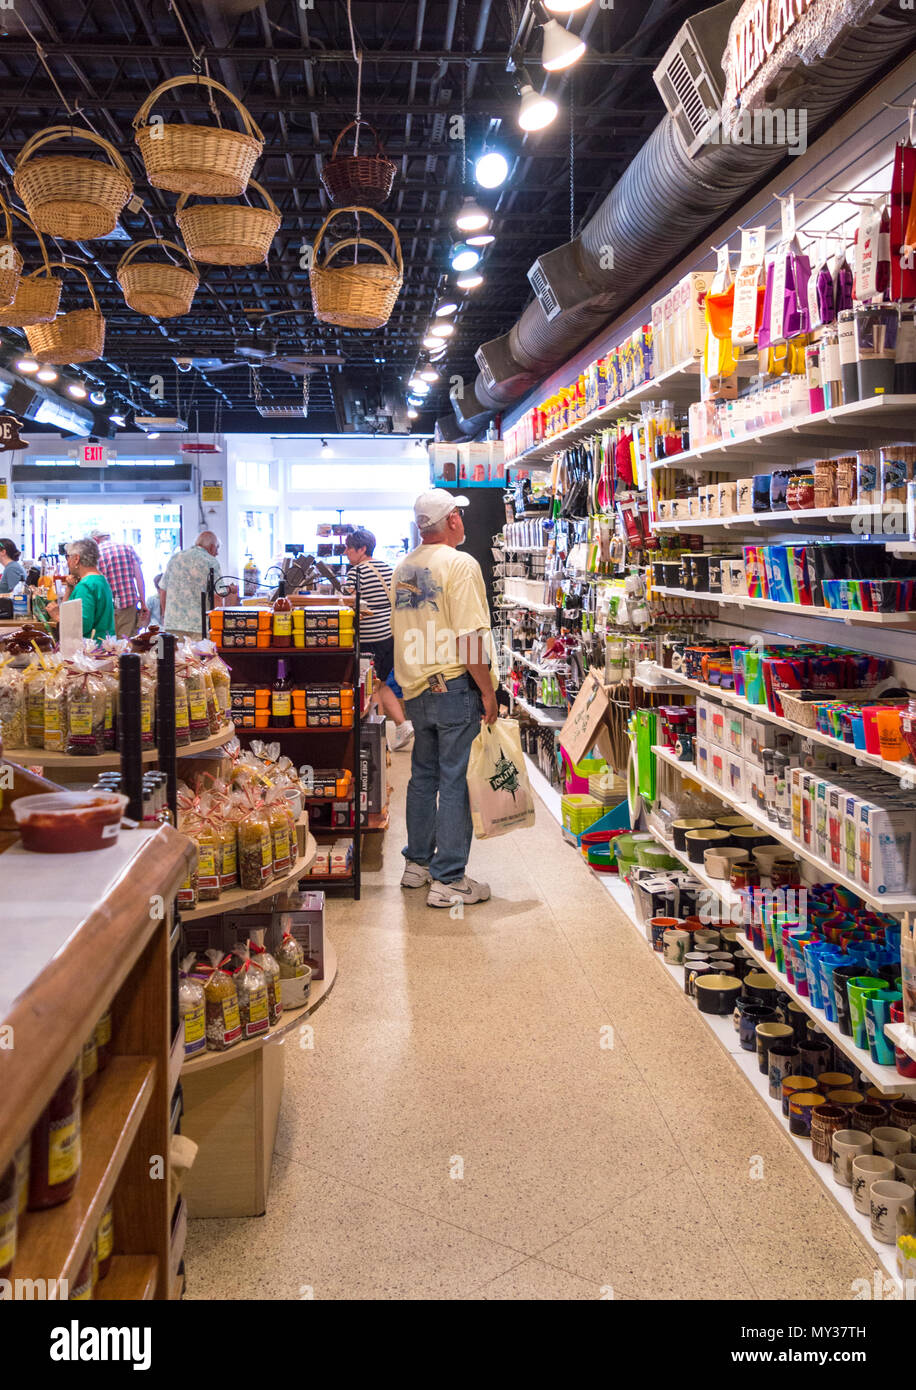 Gatlinburg,TN, USA – May 14, 2018: Customers browsing the shelves of All Sauced Up in Gatlinburg, Tennessee. Stock Photo